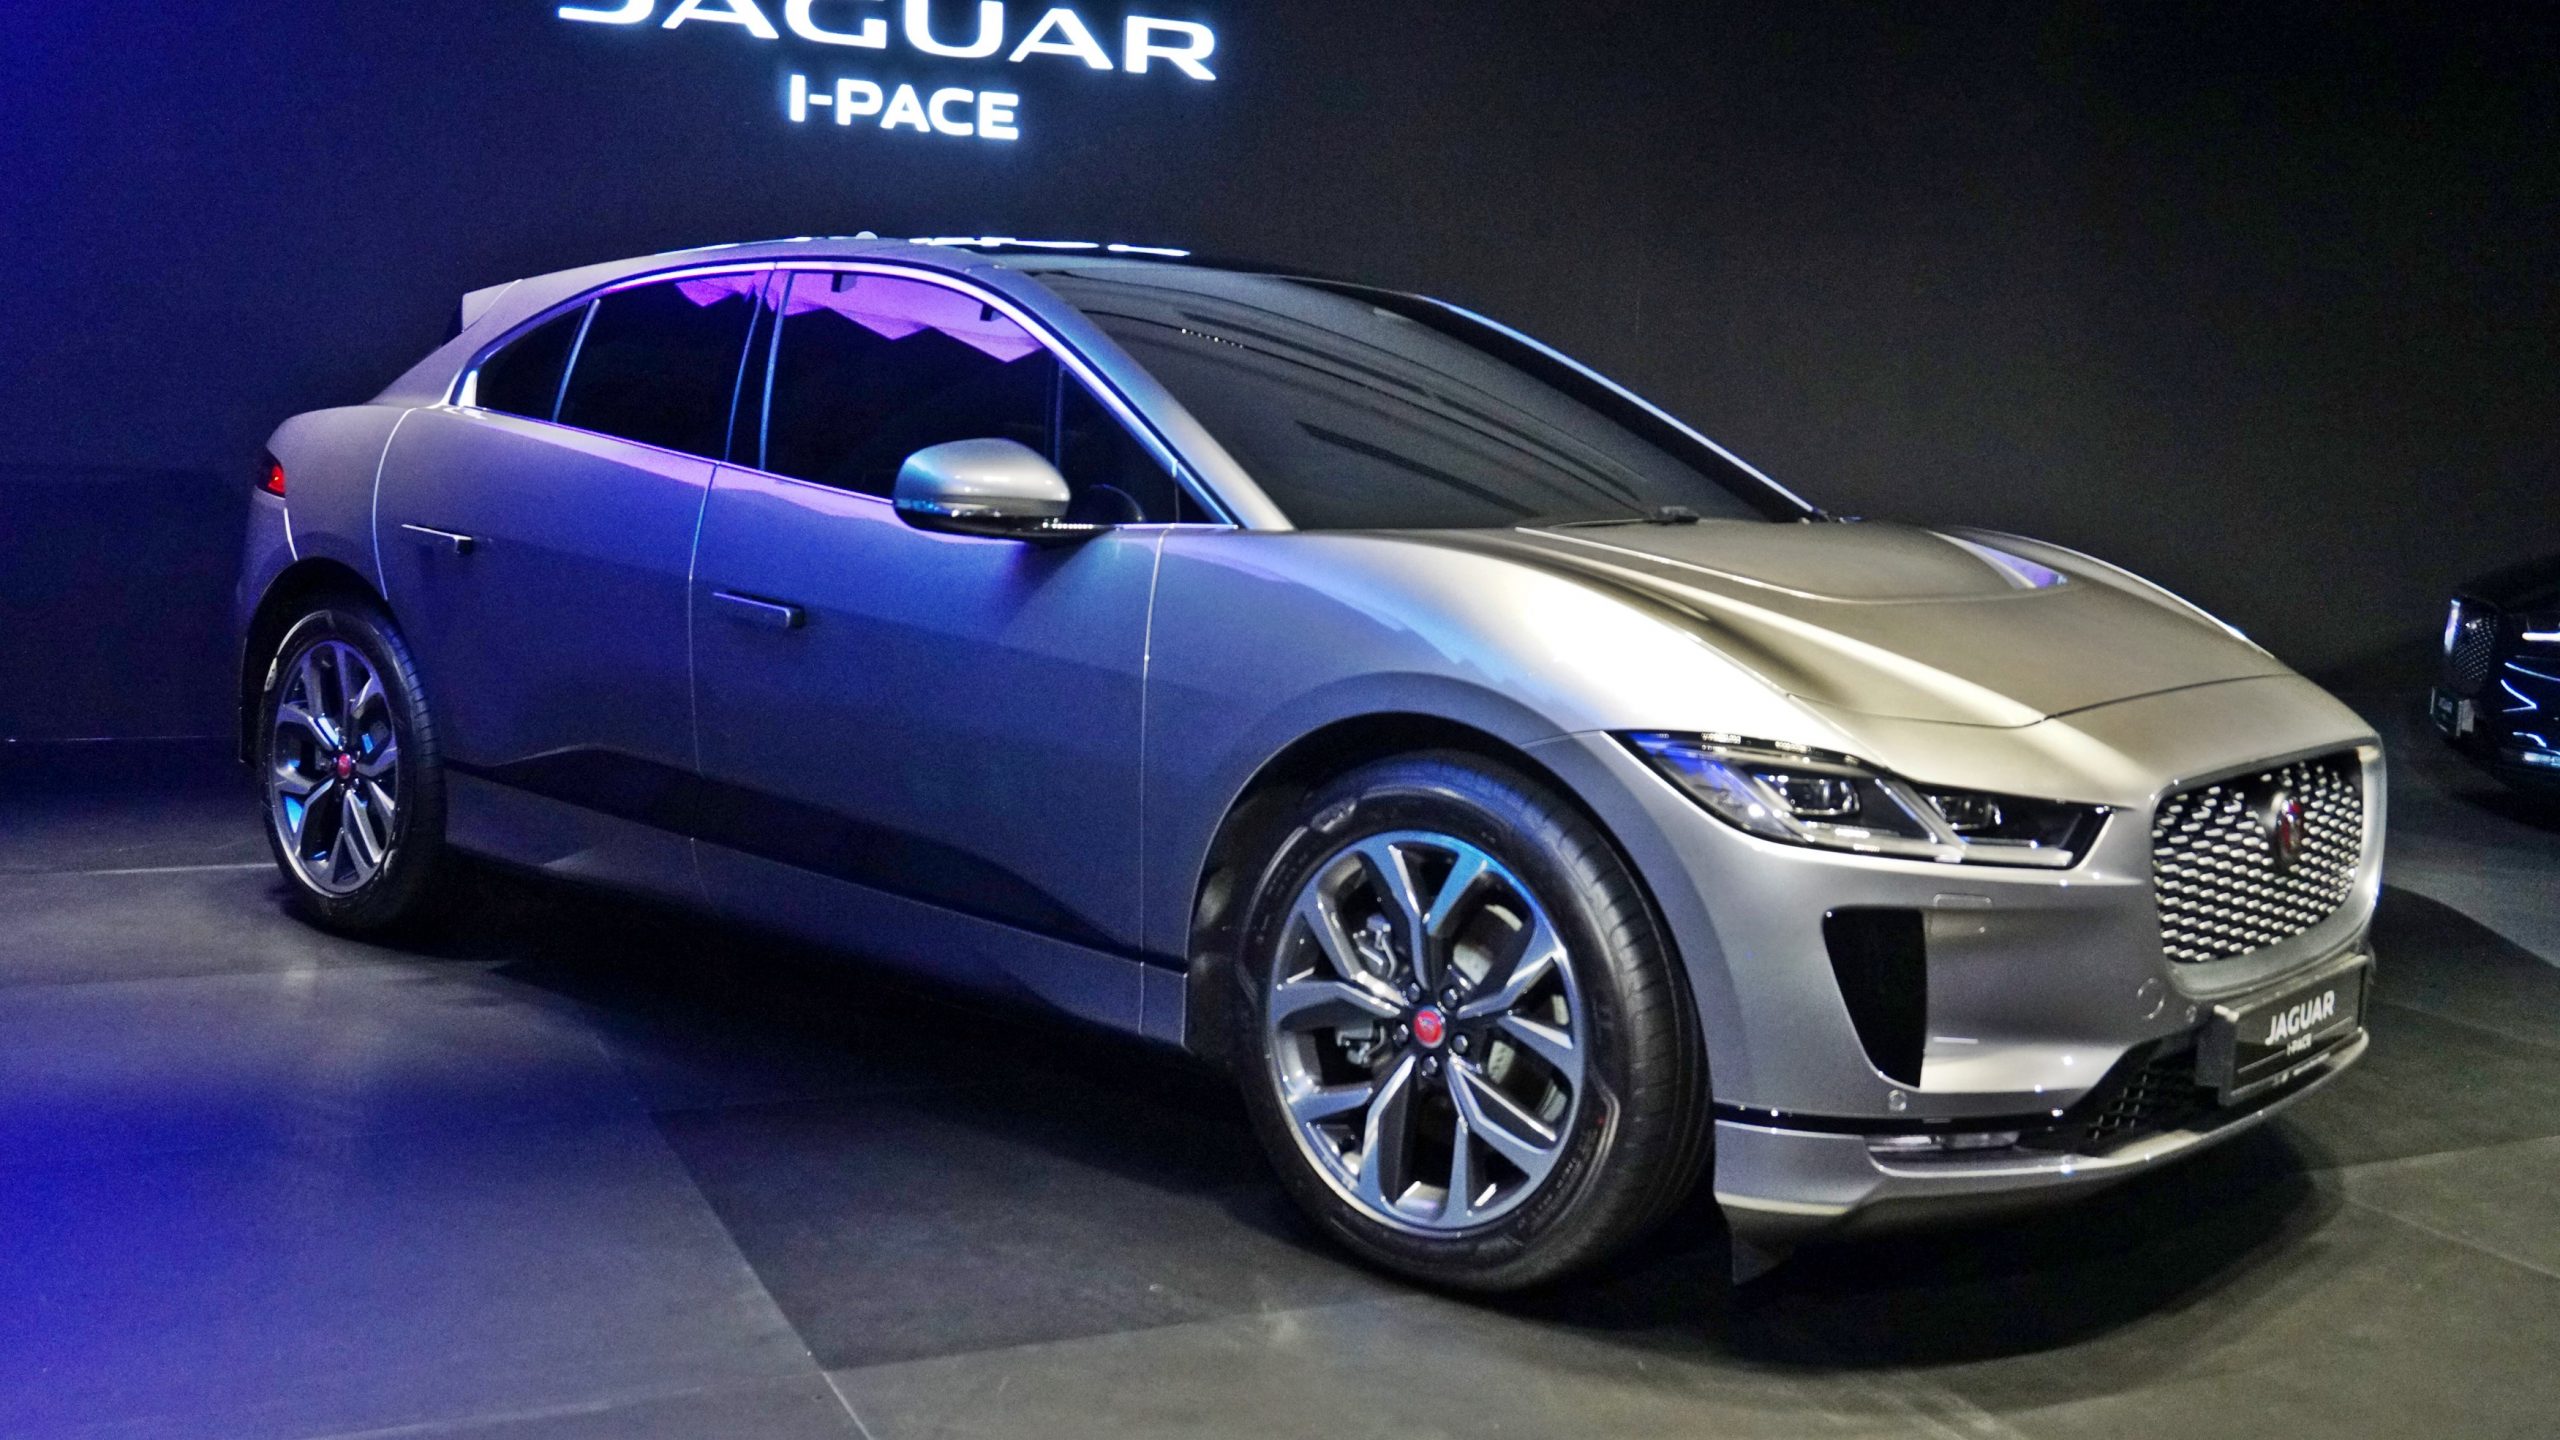 jaguar i-pace launched in malaysia, priced from rm460,800